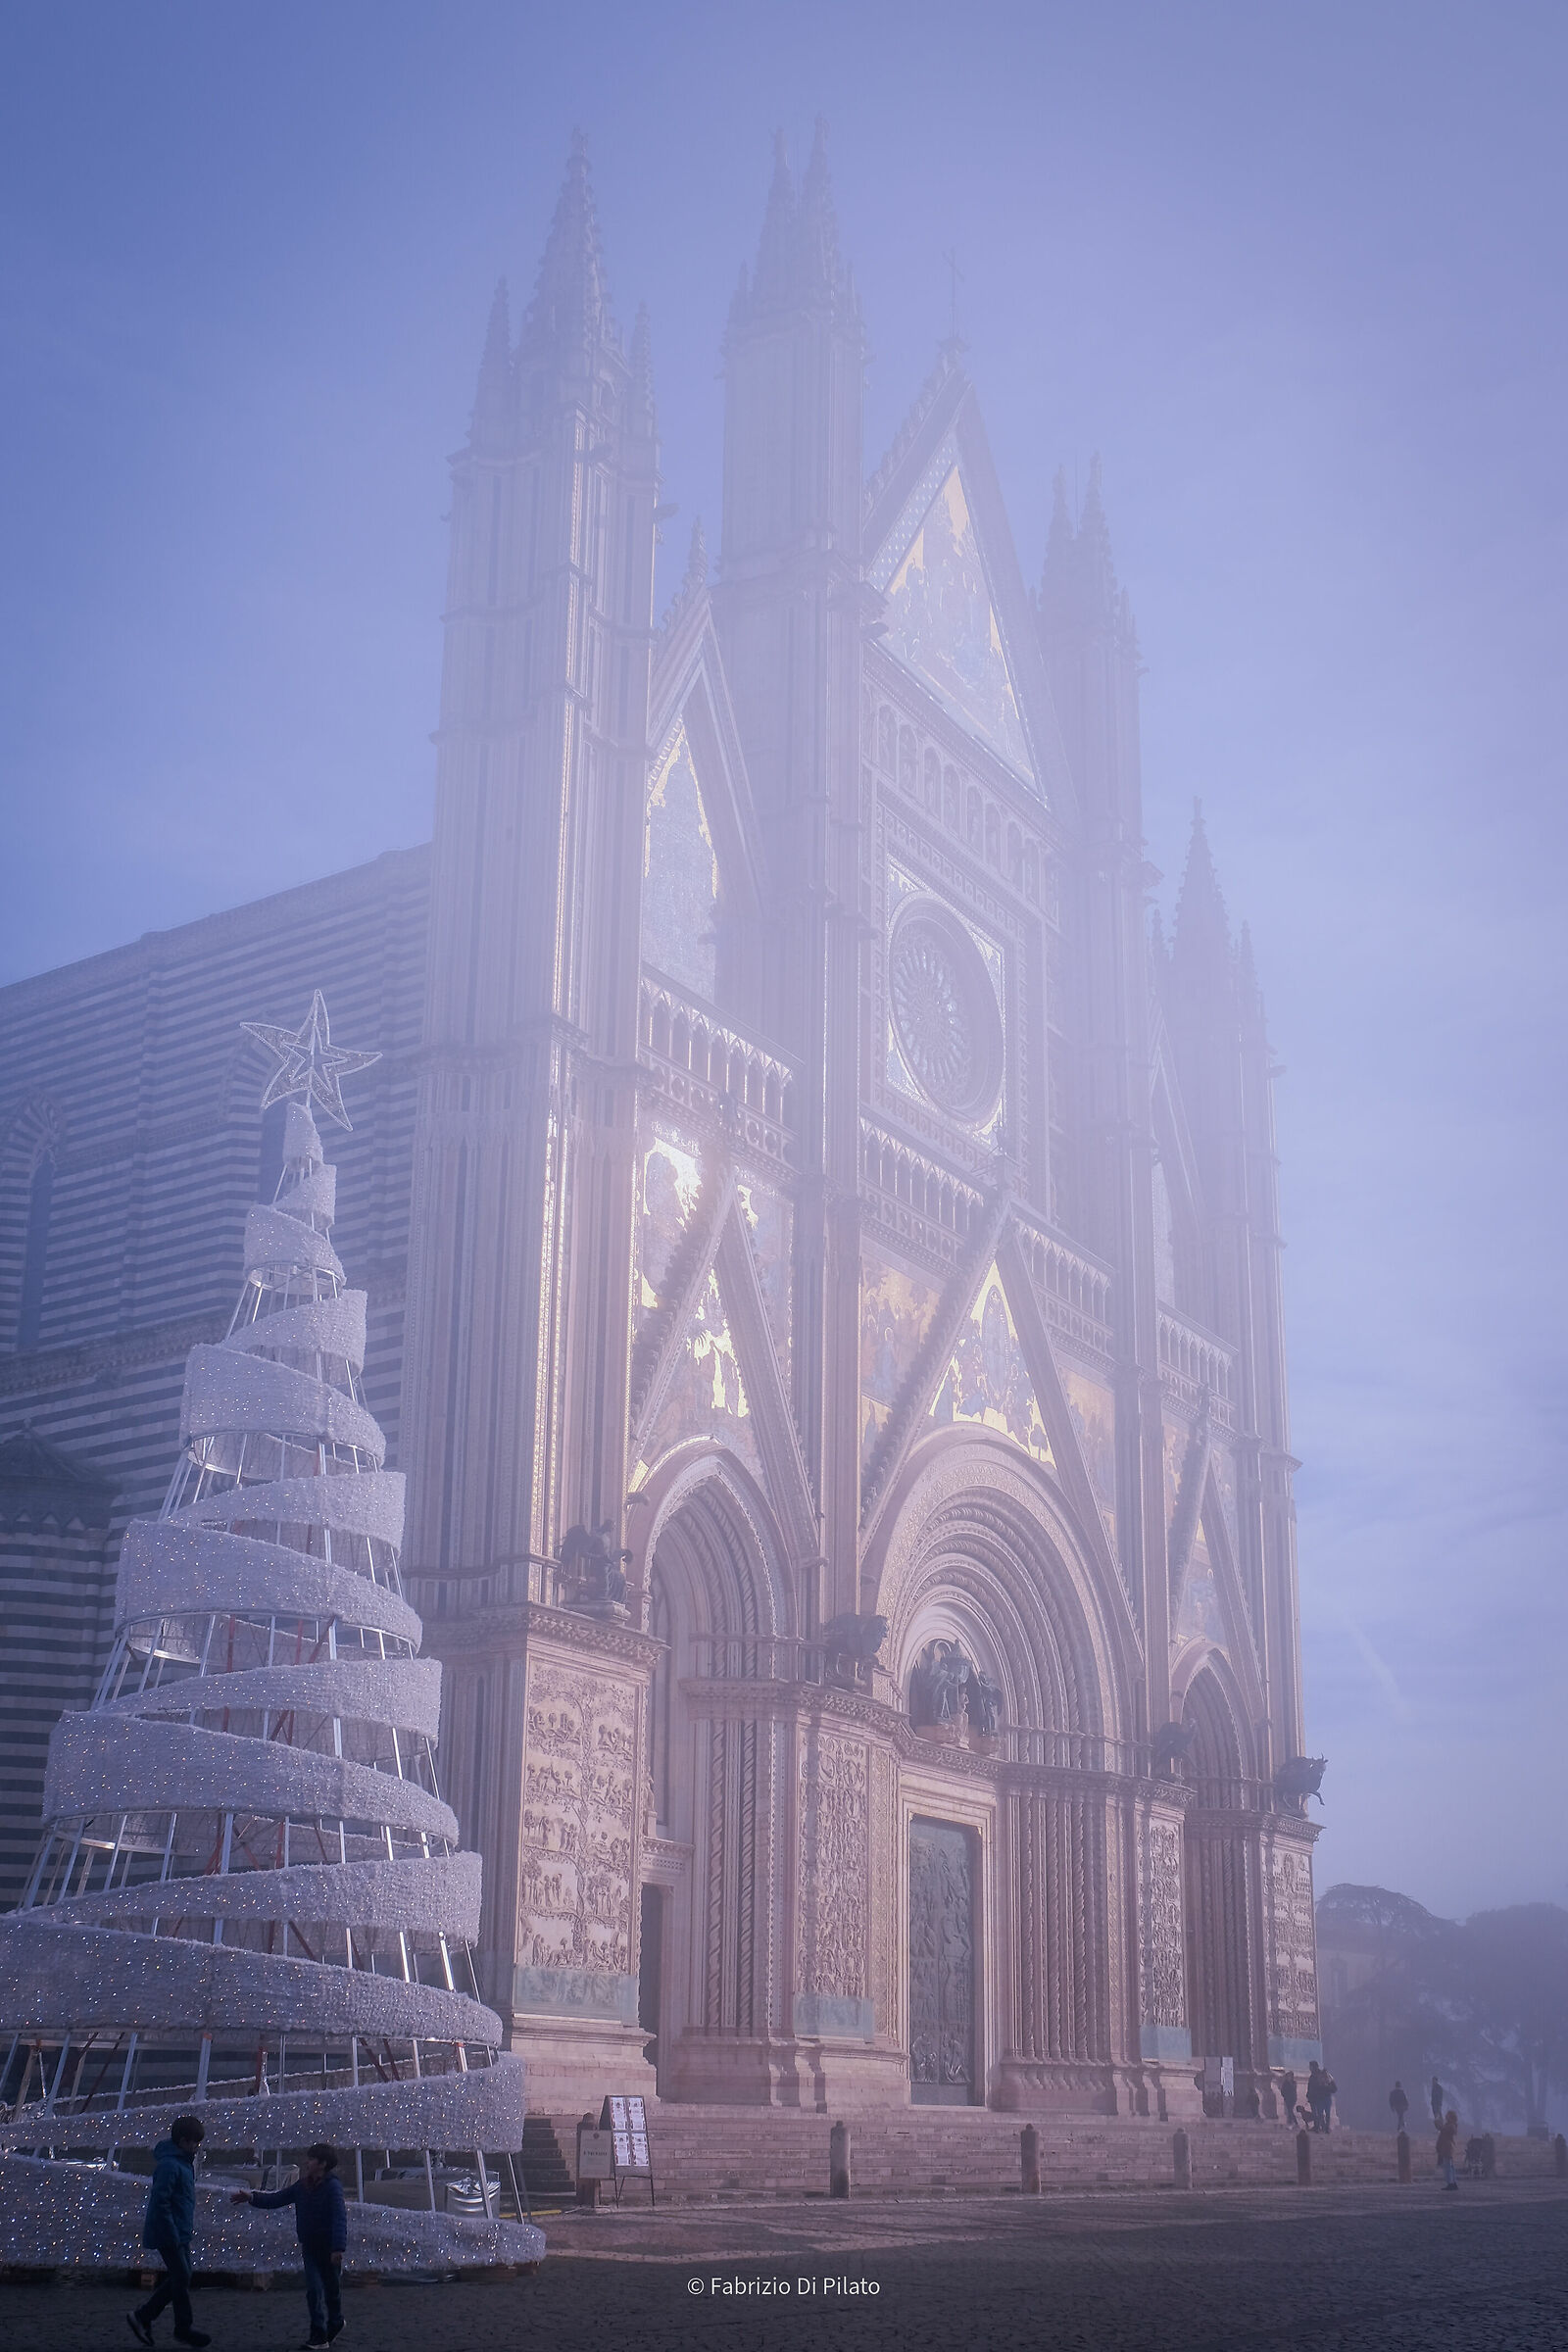 Orvieto Cathedral in the fog...